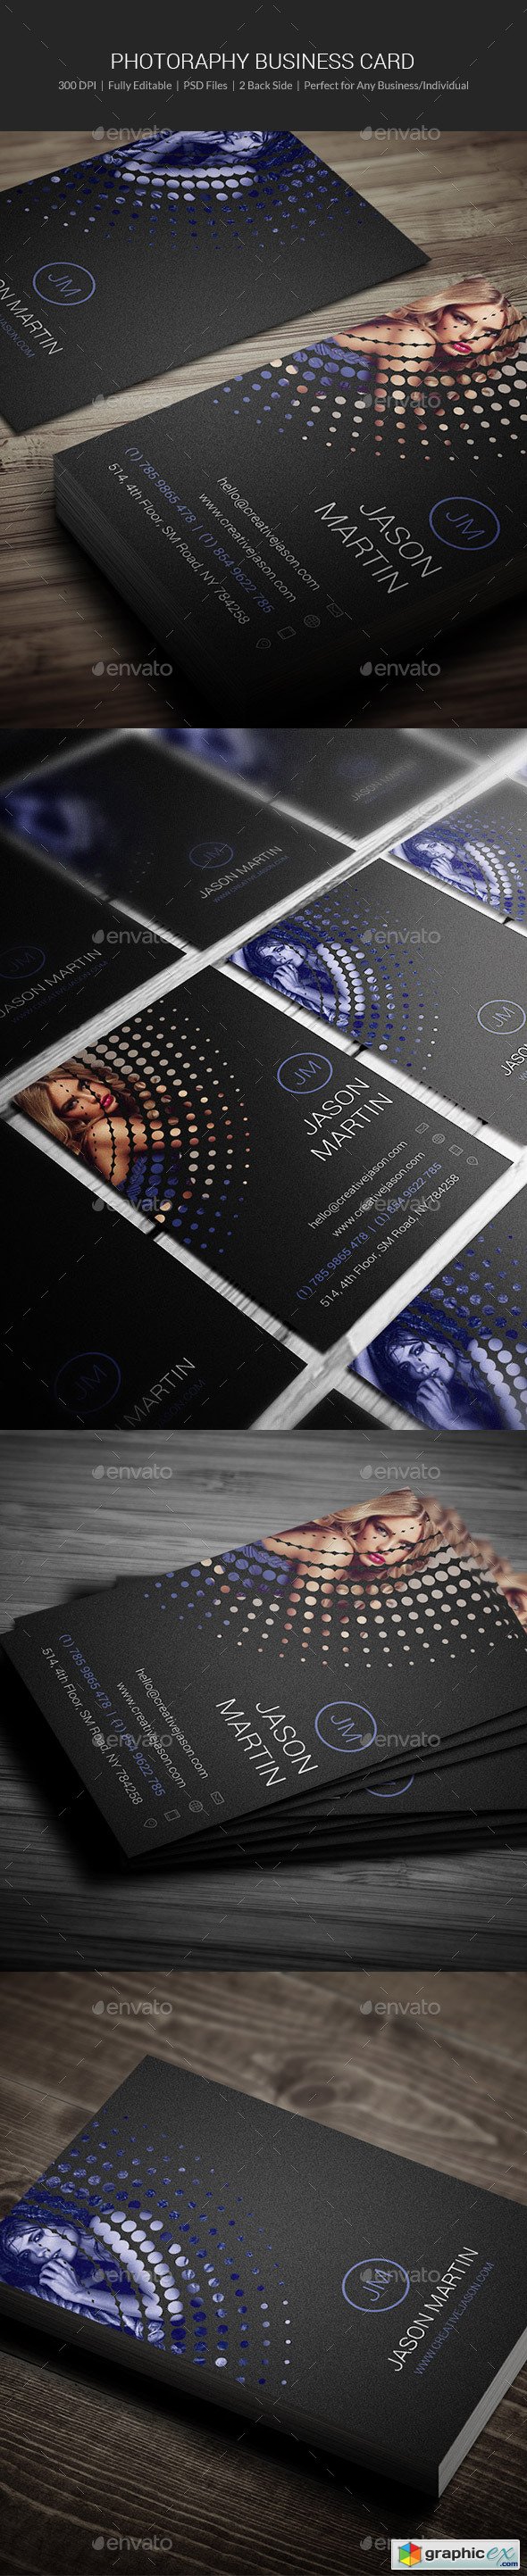 Photography Business Card - 1